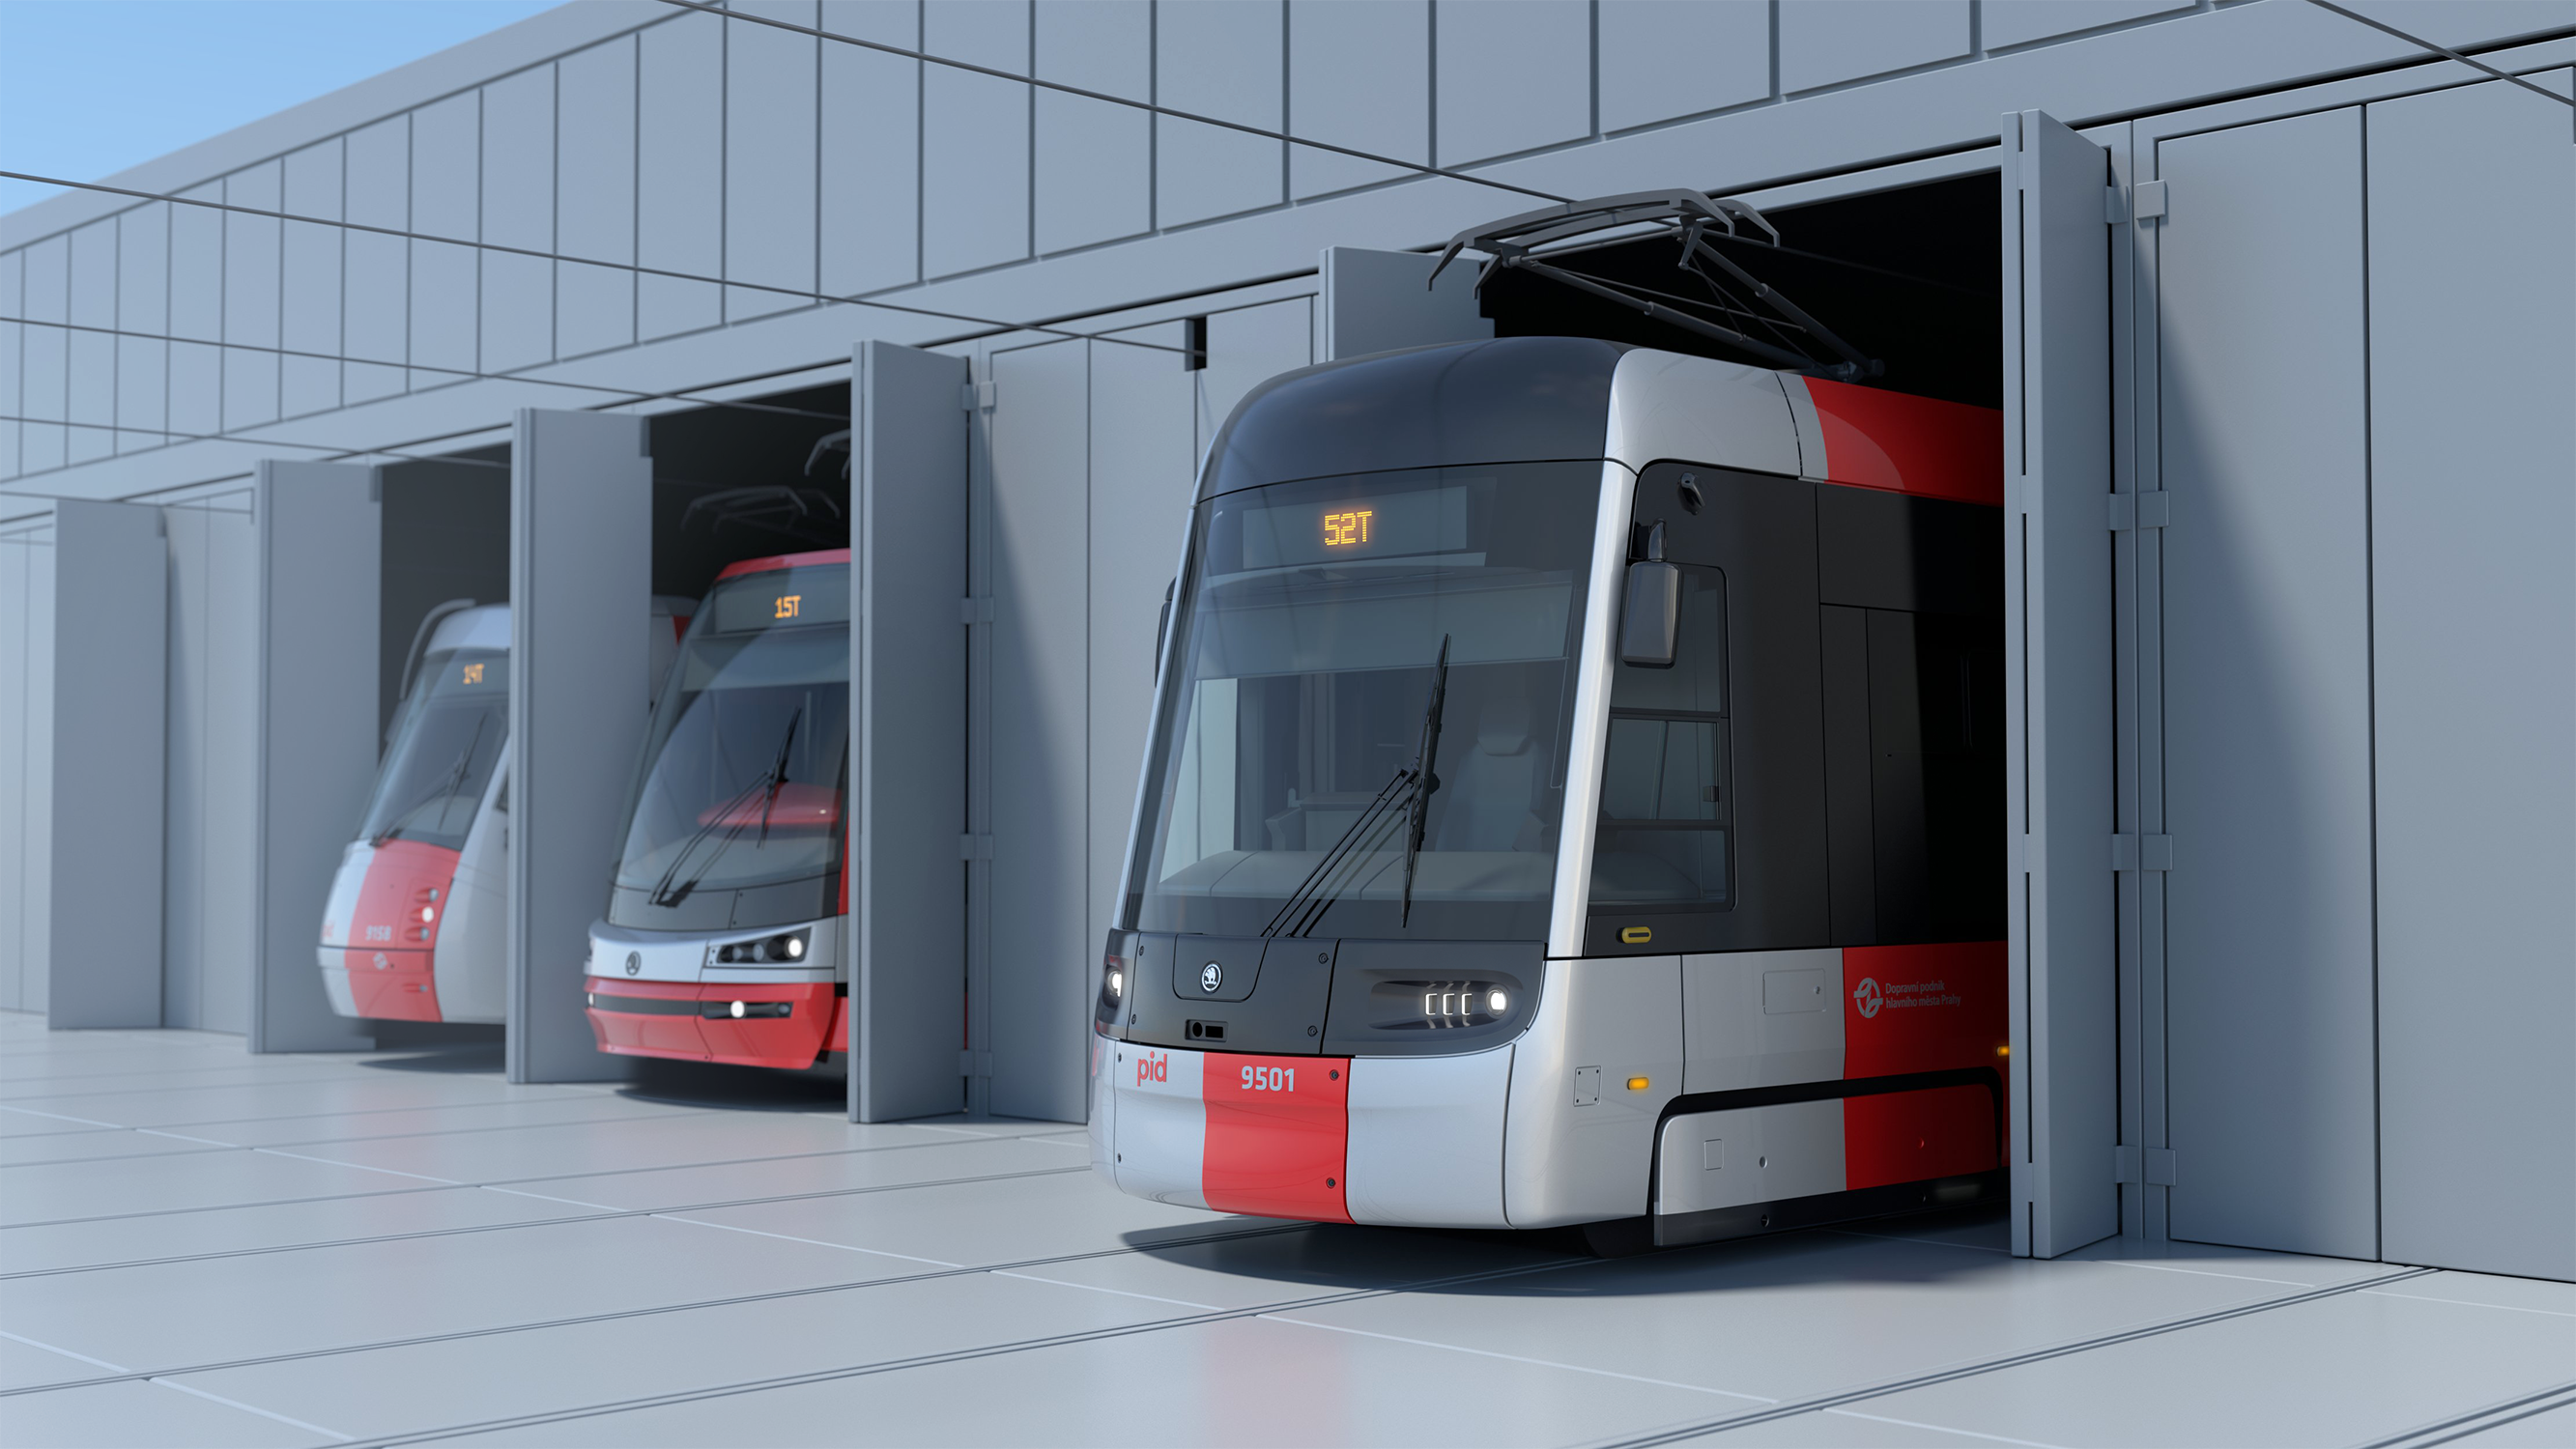 A visualisation of the new trams in the depot